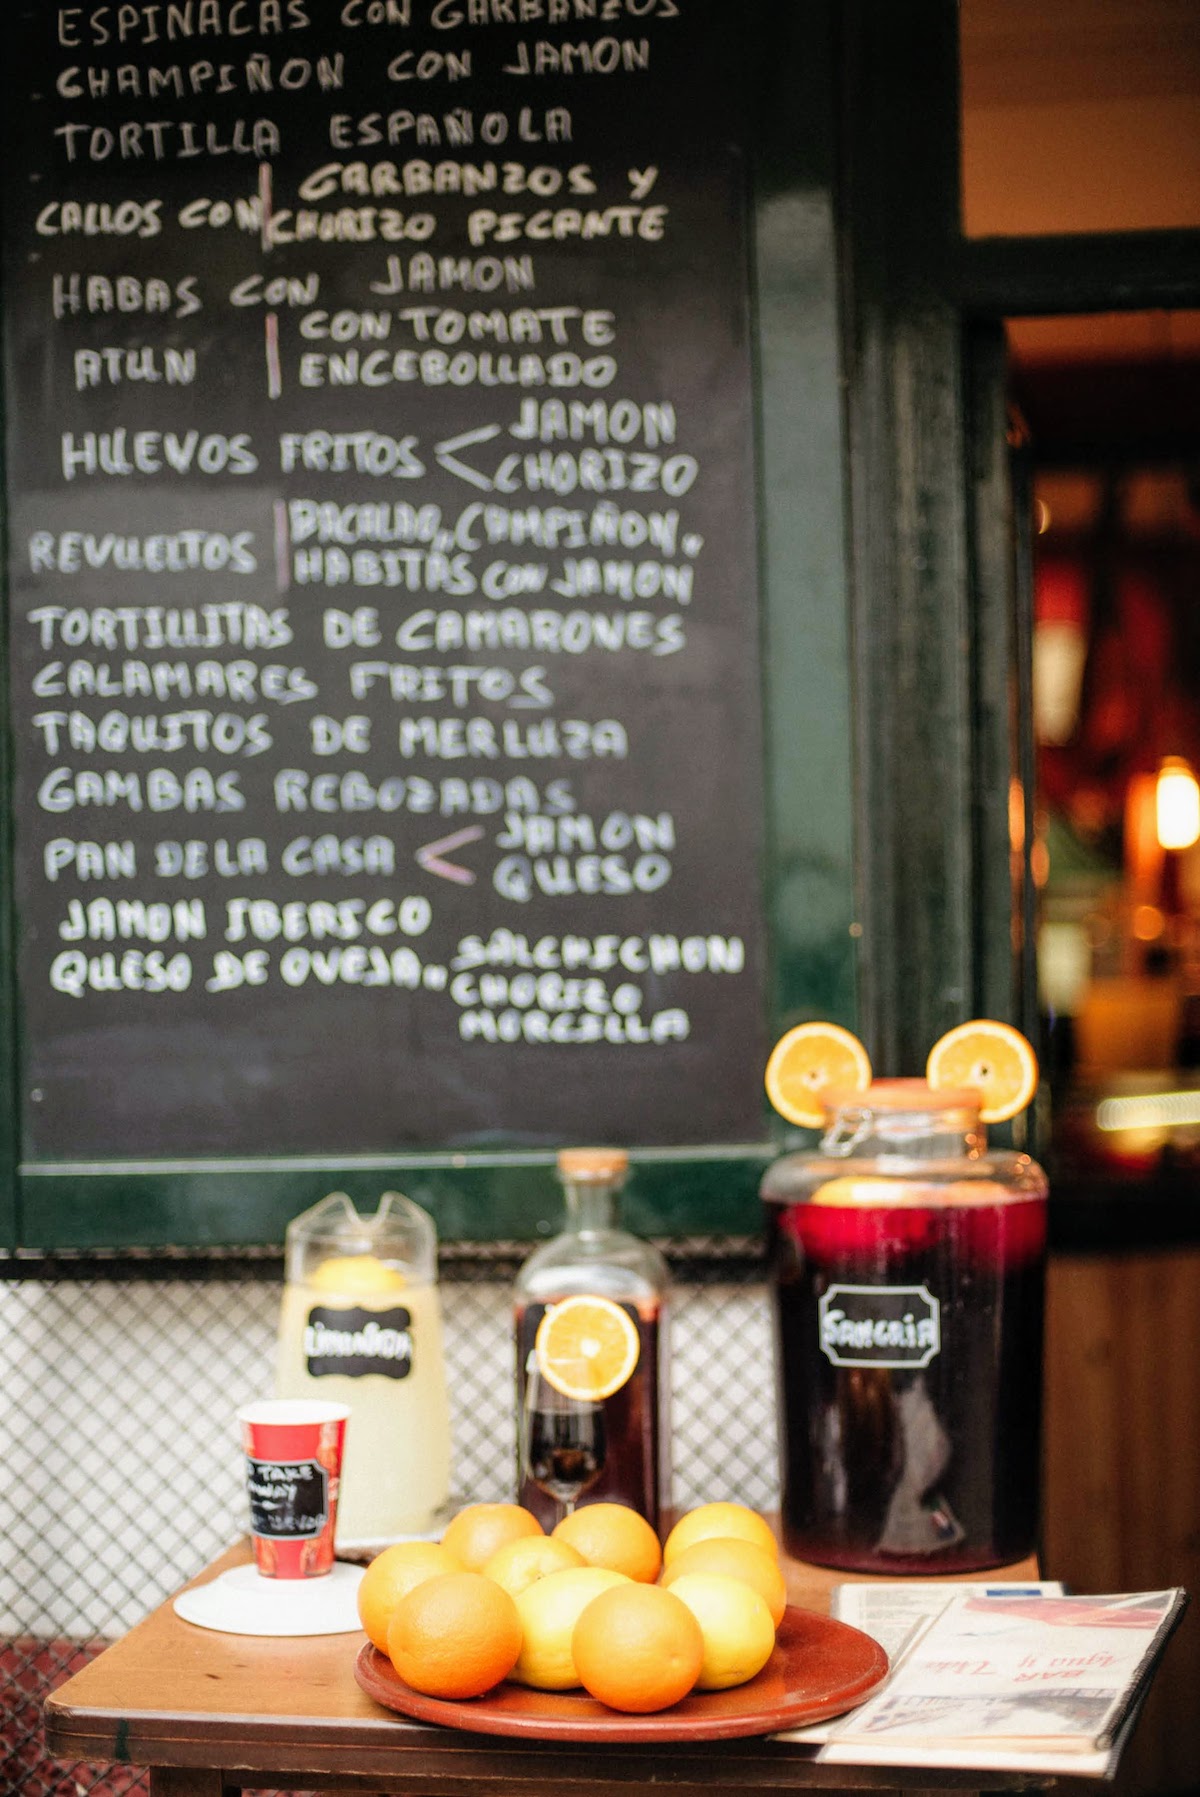 Large jugs of sangria and lemonade behind a tray of oranges, with a chalkboard menu in the background.